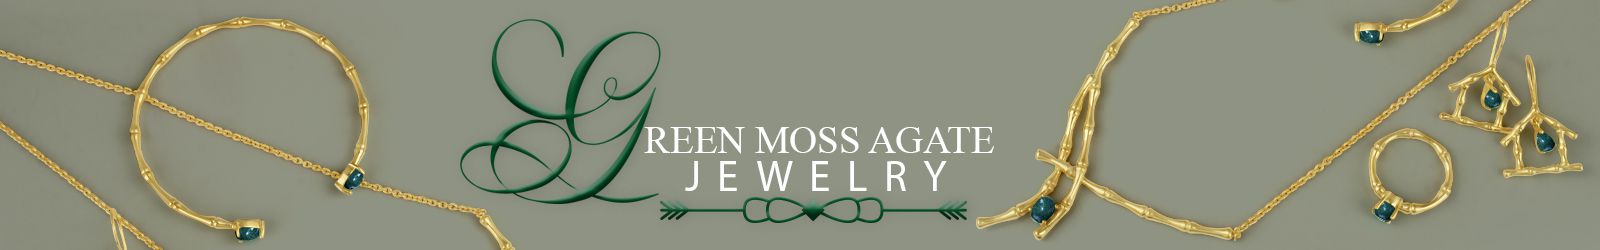 Green Moss Agate Silver Jewelry Manufacturer Exporter in Jaipur